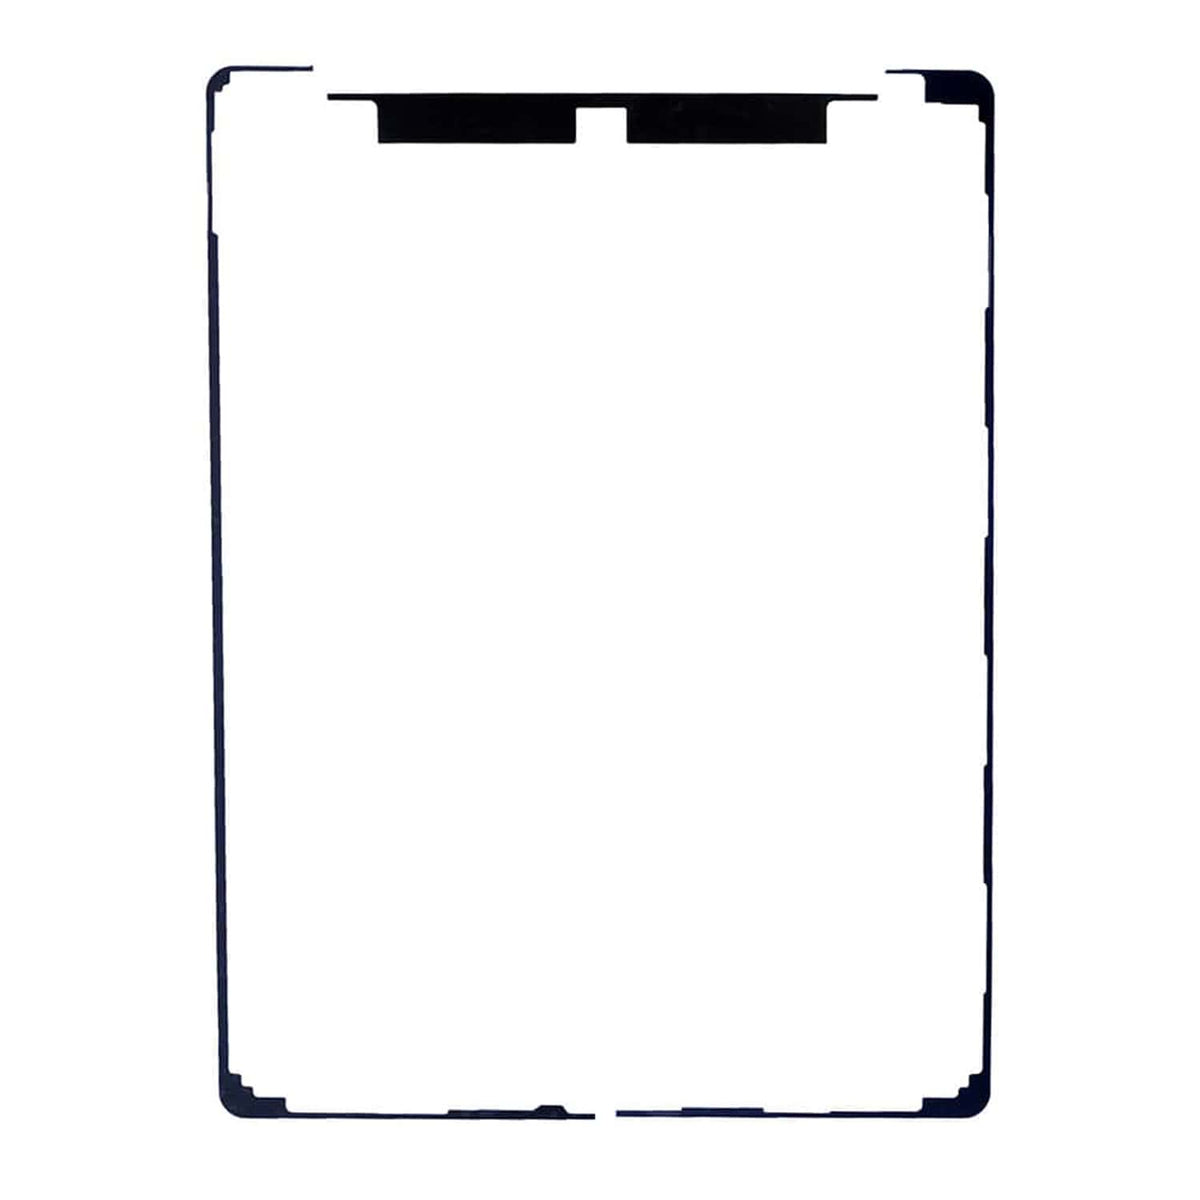 TOUCH SCREEN ADHESIVE STRIPS FOR IPAD PRO 12.9" 2ND GEN